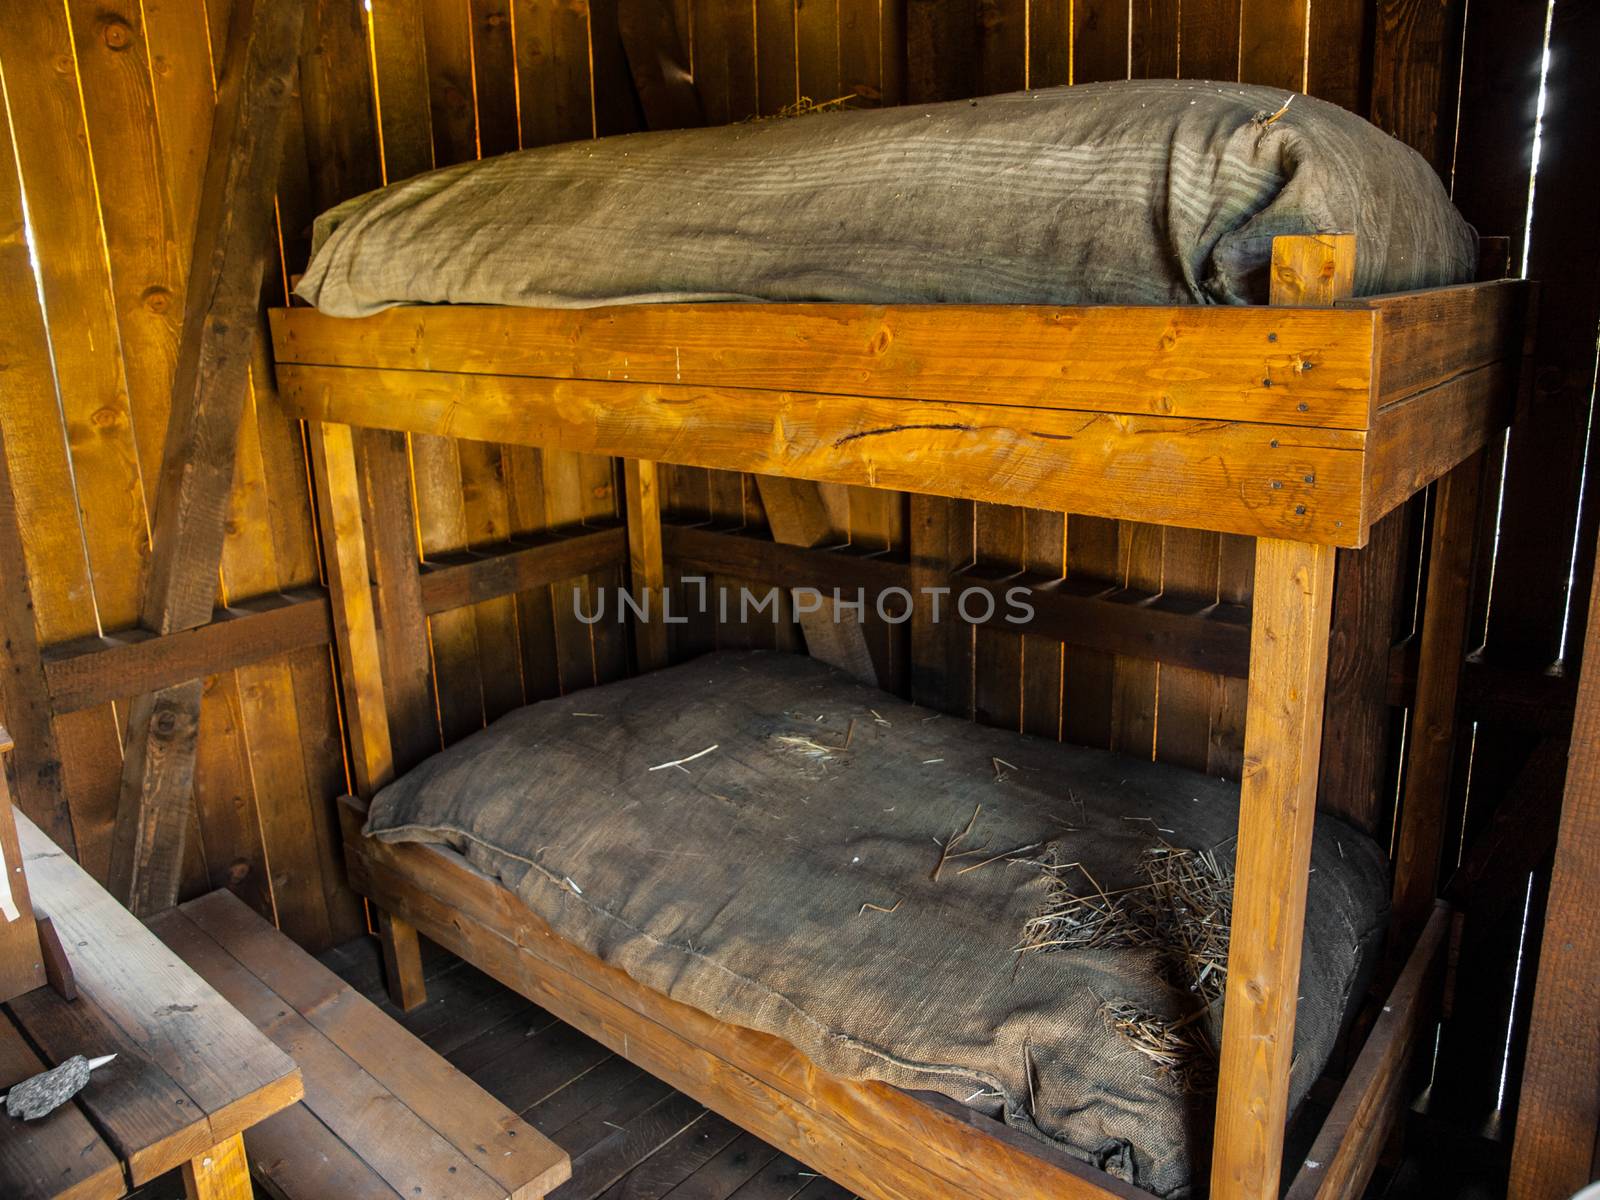 Bunk bed in concentration camp (Lety, Czech Republic)